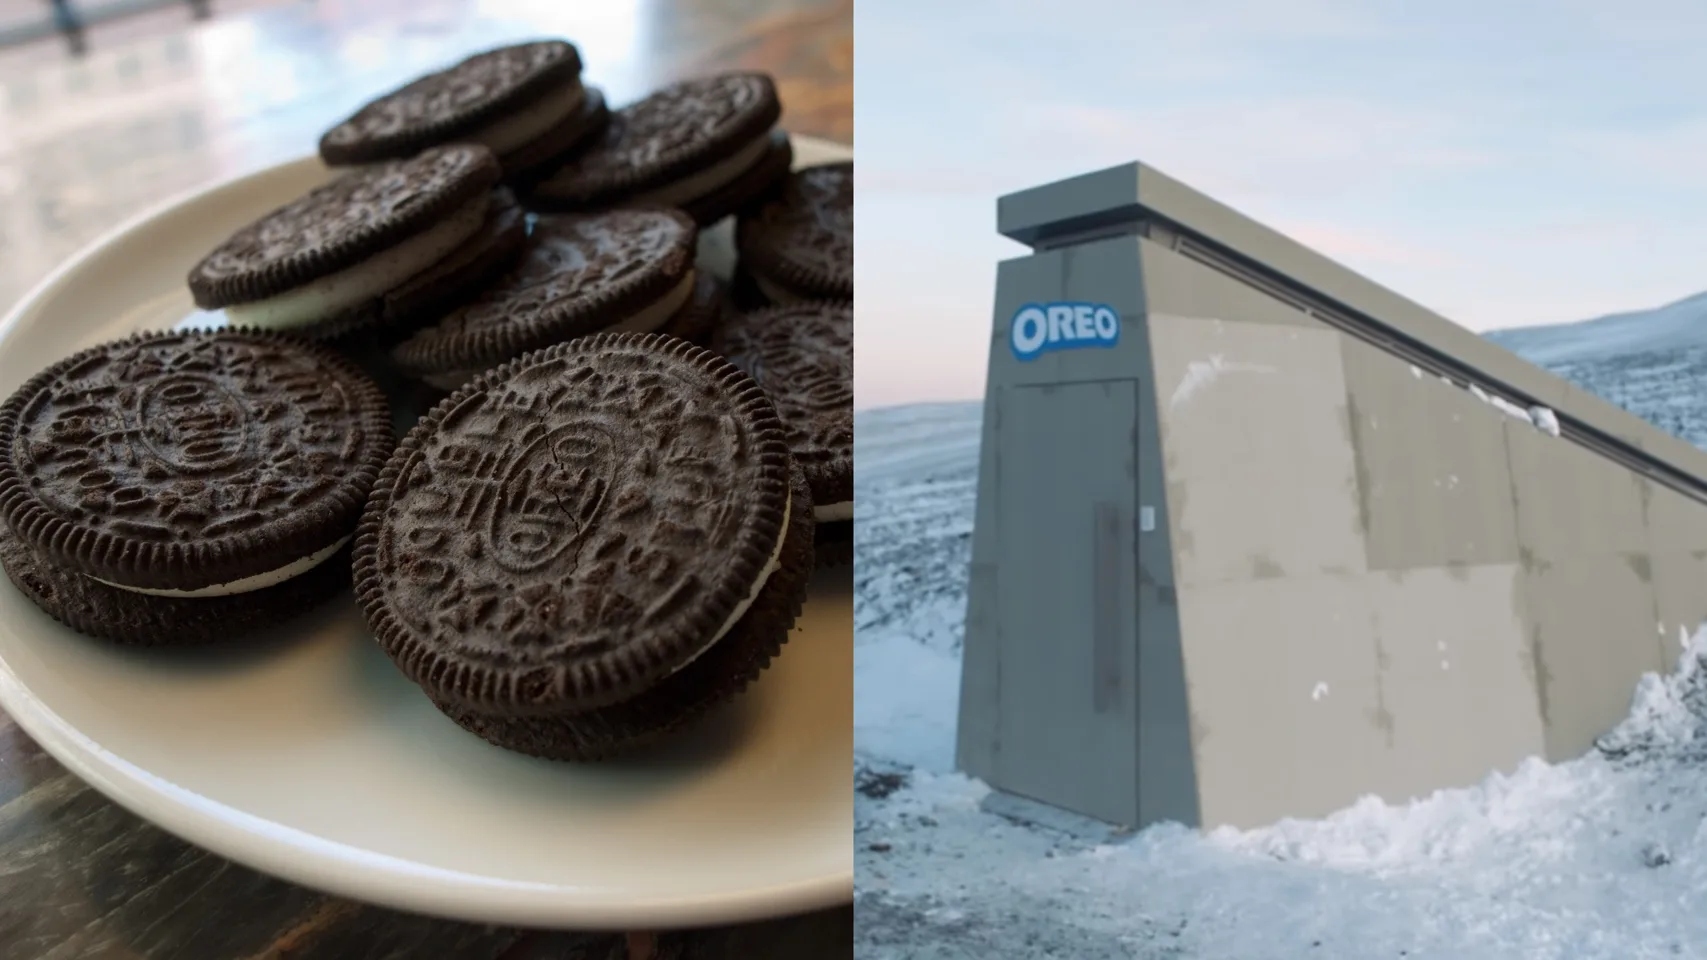 Oreo Builds Doomsday Vault To Protect Its Recipe And Cookies From Possible Asteroid Crash